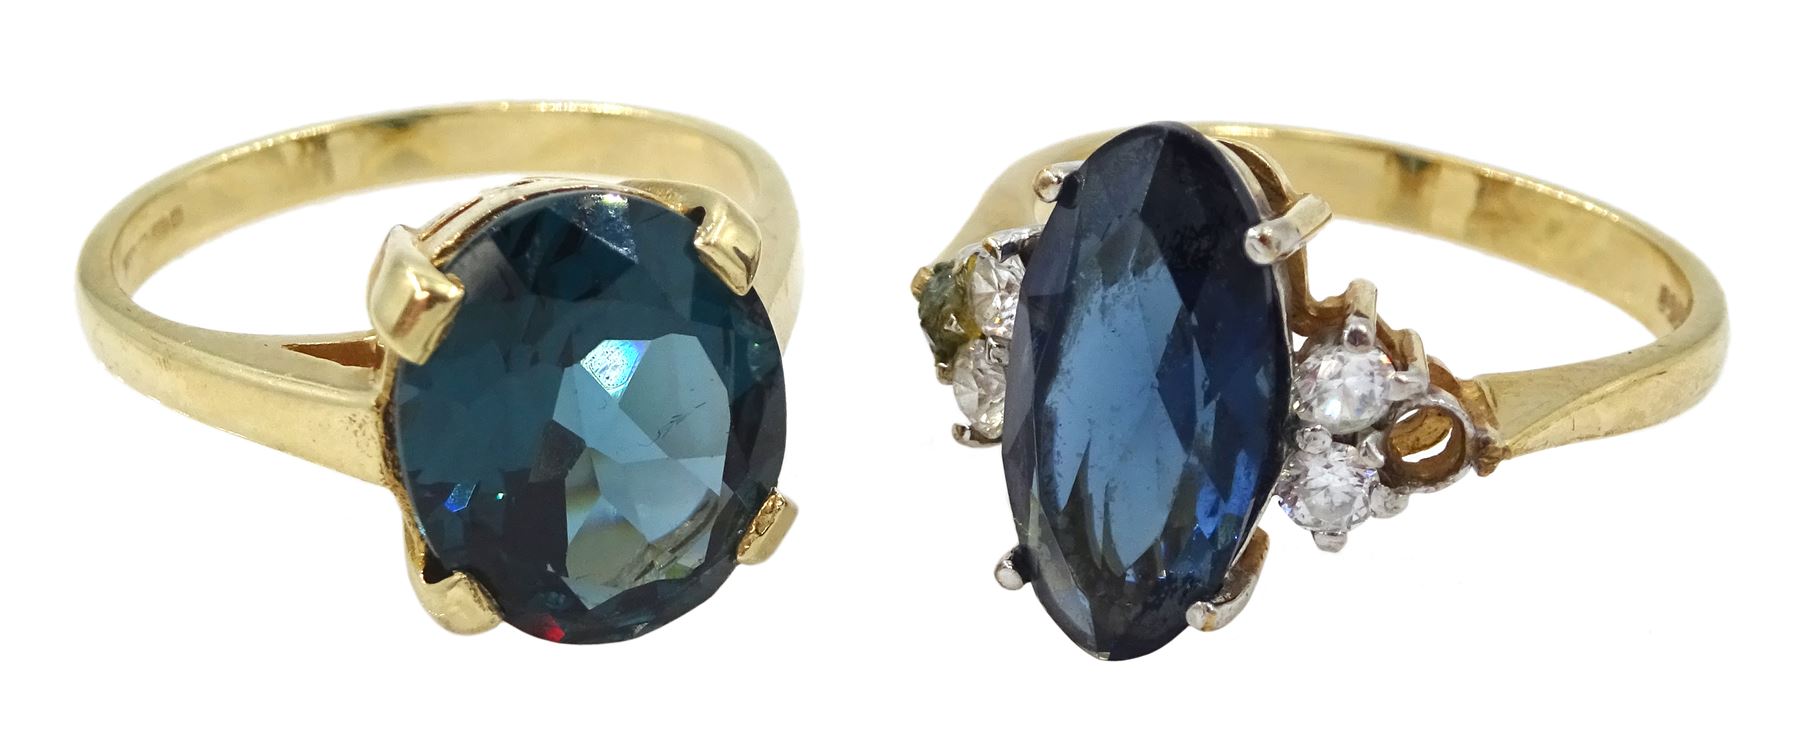 Gold single London blue topaz and one other gold stone set dress ring